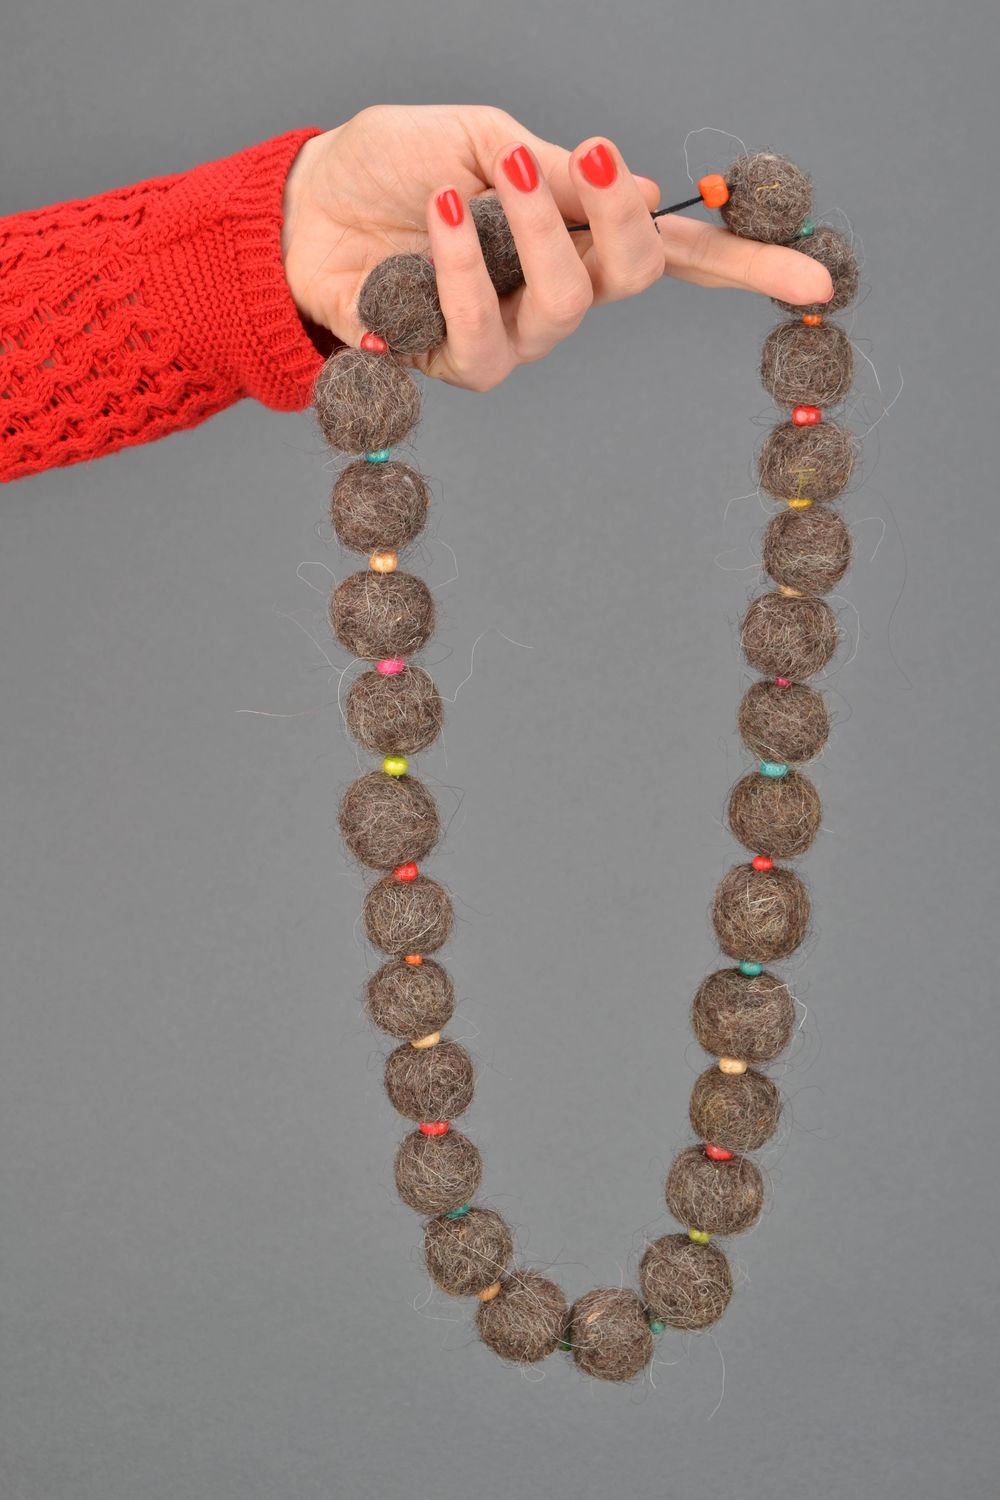 Wool felted bead necklace photo 2